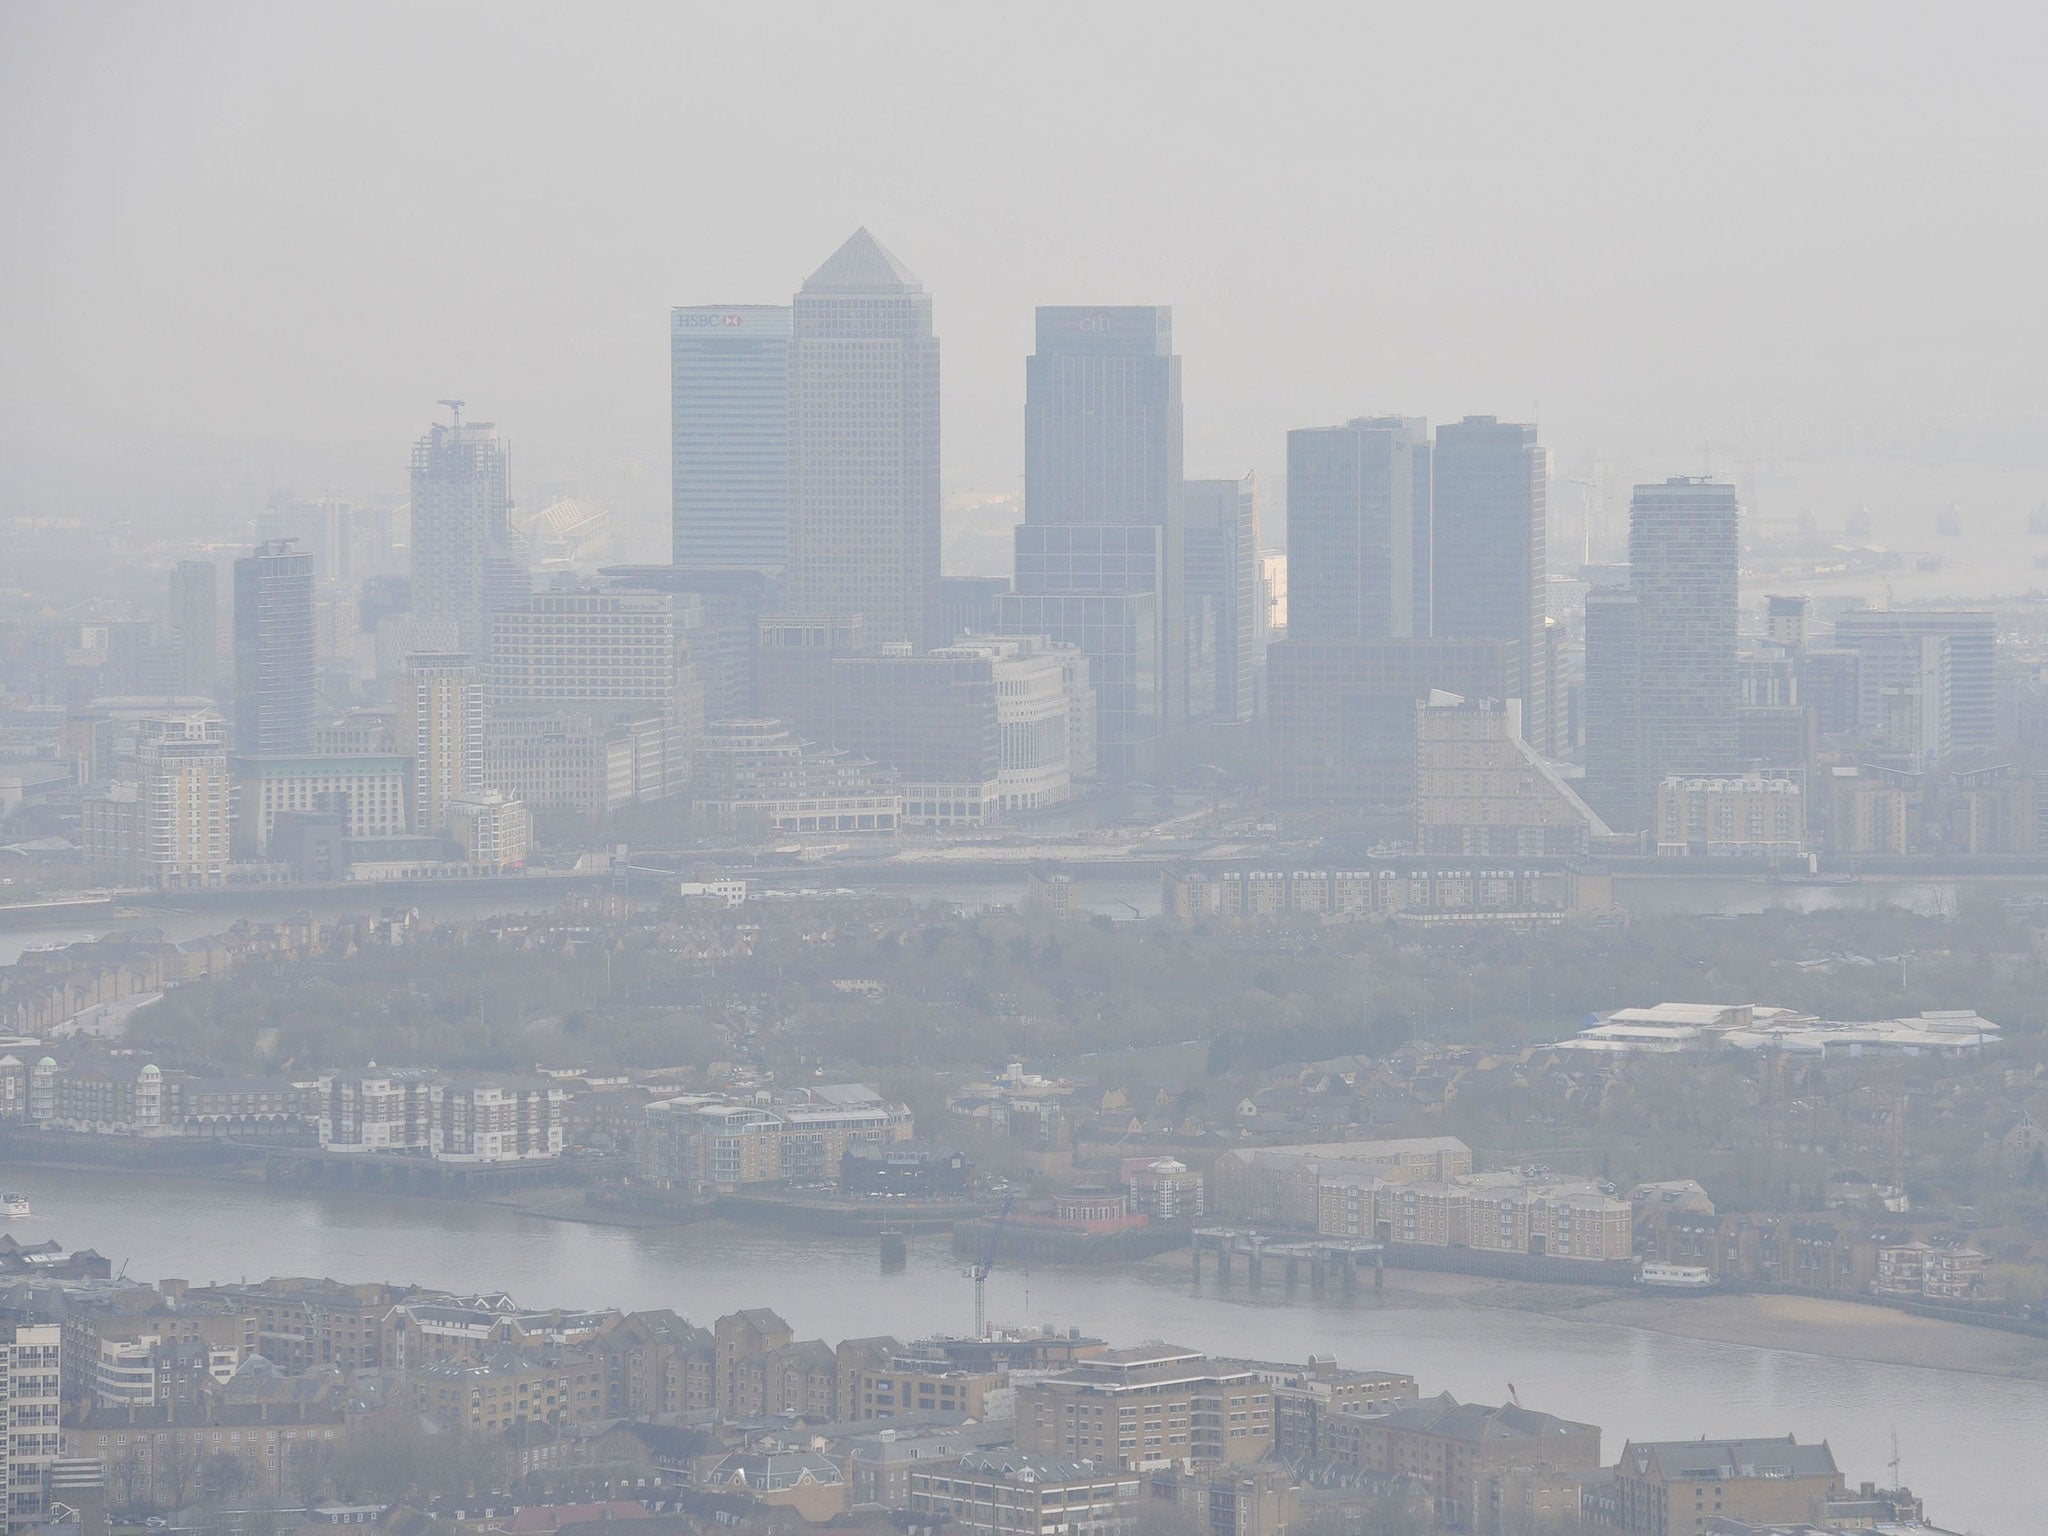 The health impacts of air pollution in the UK are estimated to cost the UK more than £20bn every year